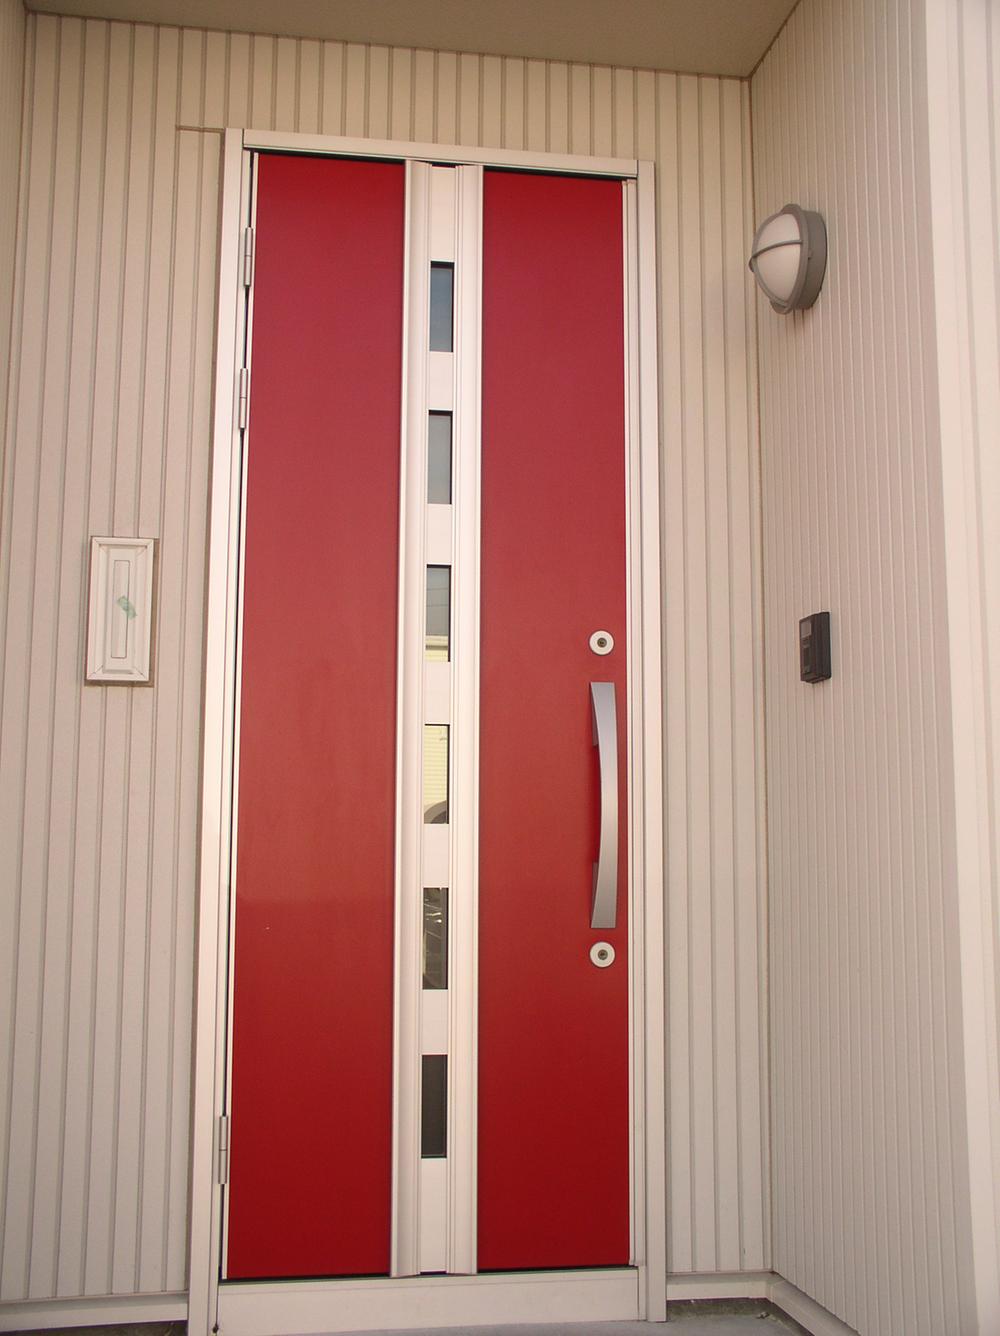 Entrance. Entrance door of the accent color